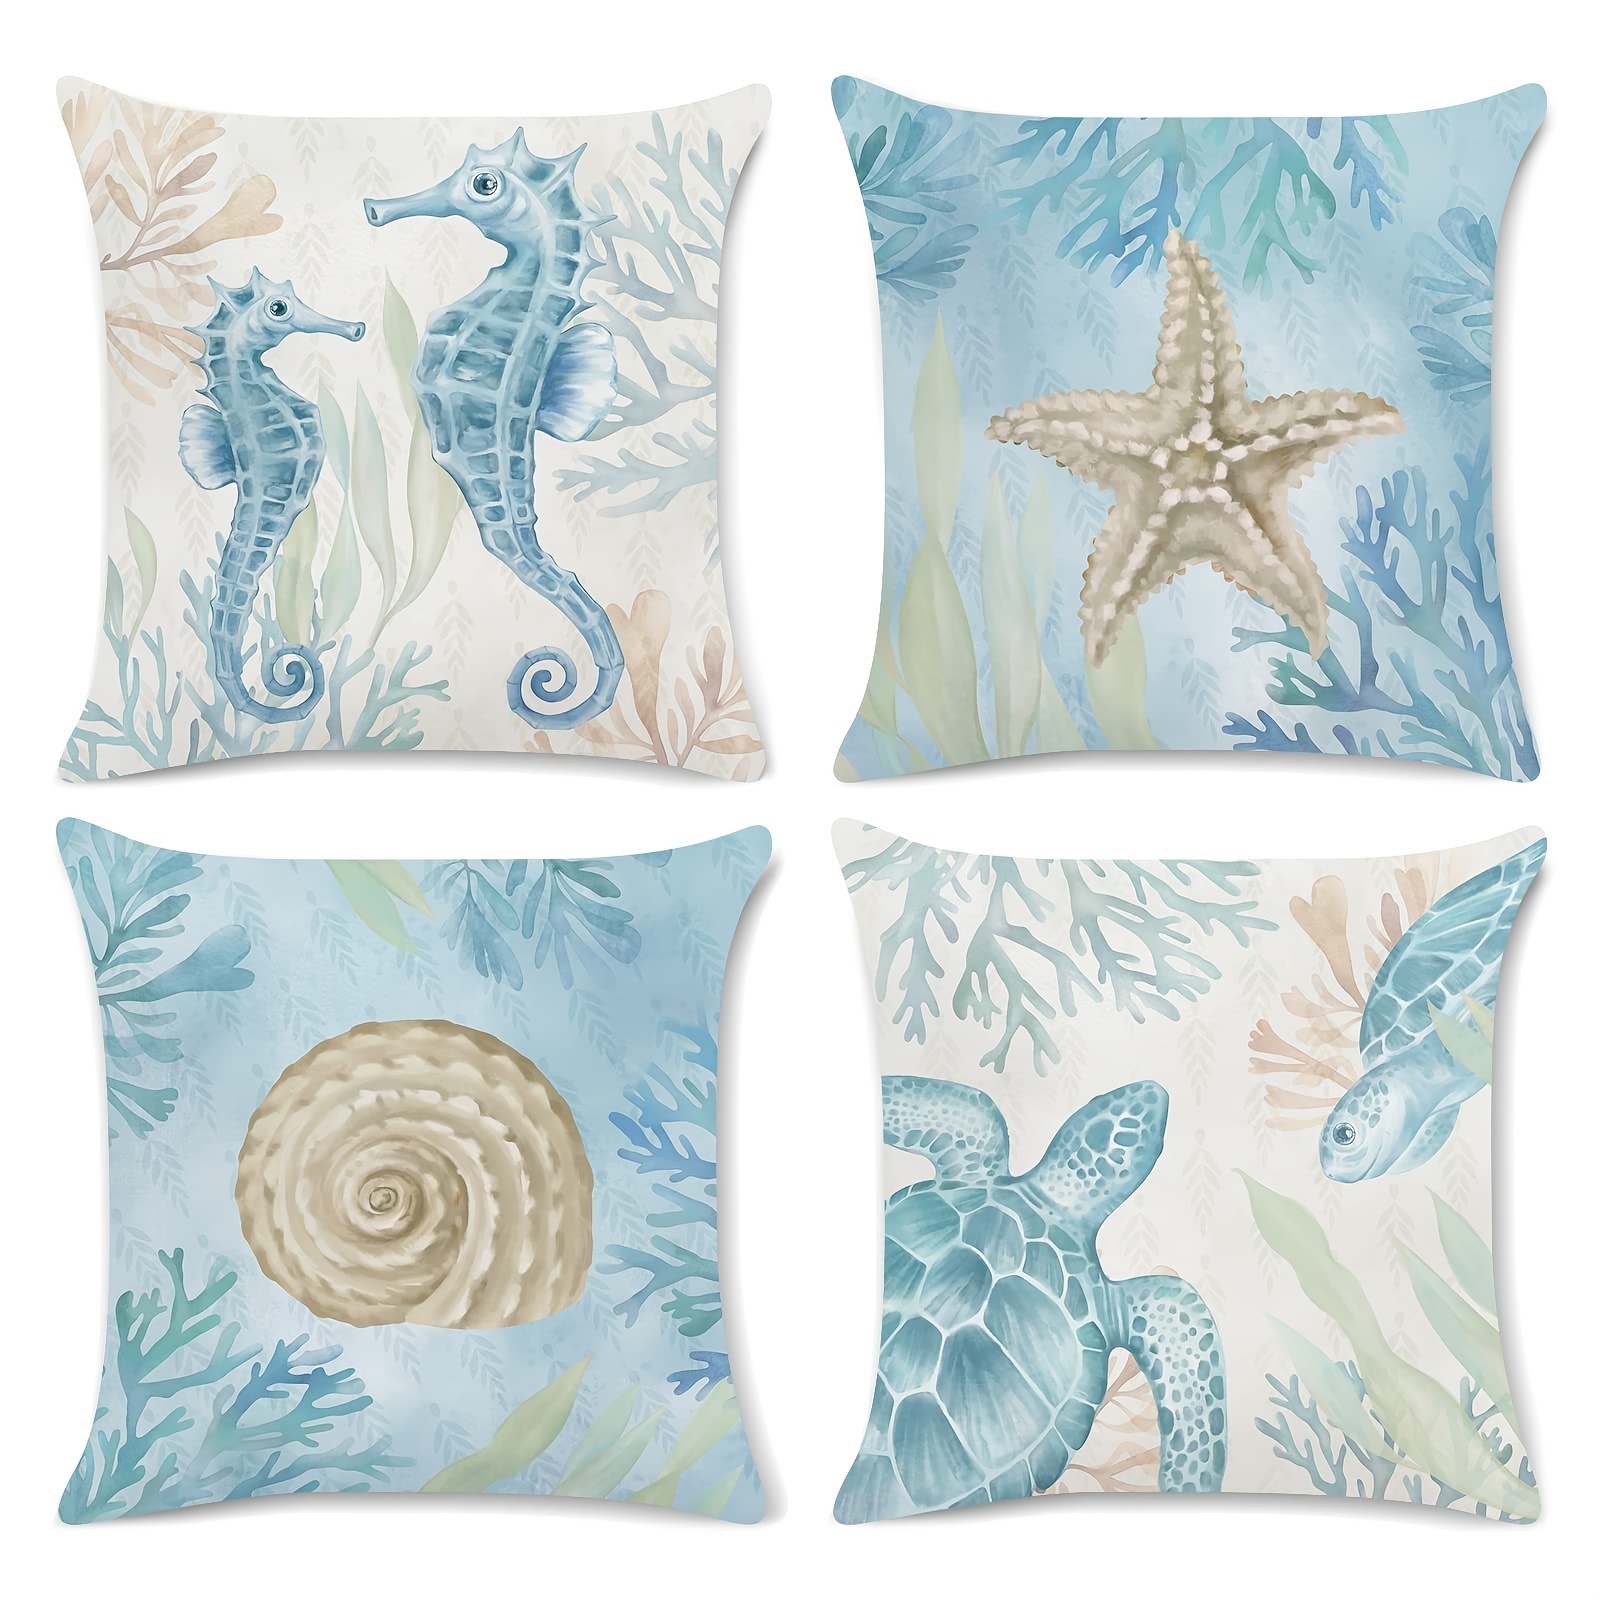 

4pcs Ocean Beach Throw Pillow Covers 18 X 18 Inch Seahorse Turtle Starfish Coastal Outdoor Decorative Pillows Soft Velvet Cushion Cases For Couch Sofa Bed Home Decor